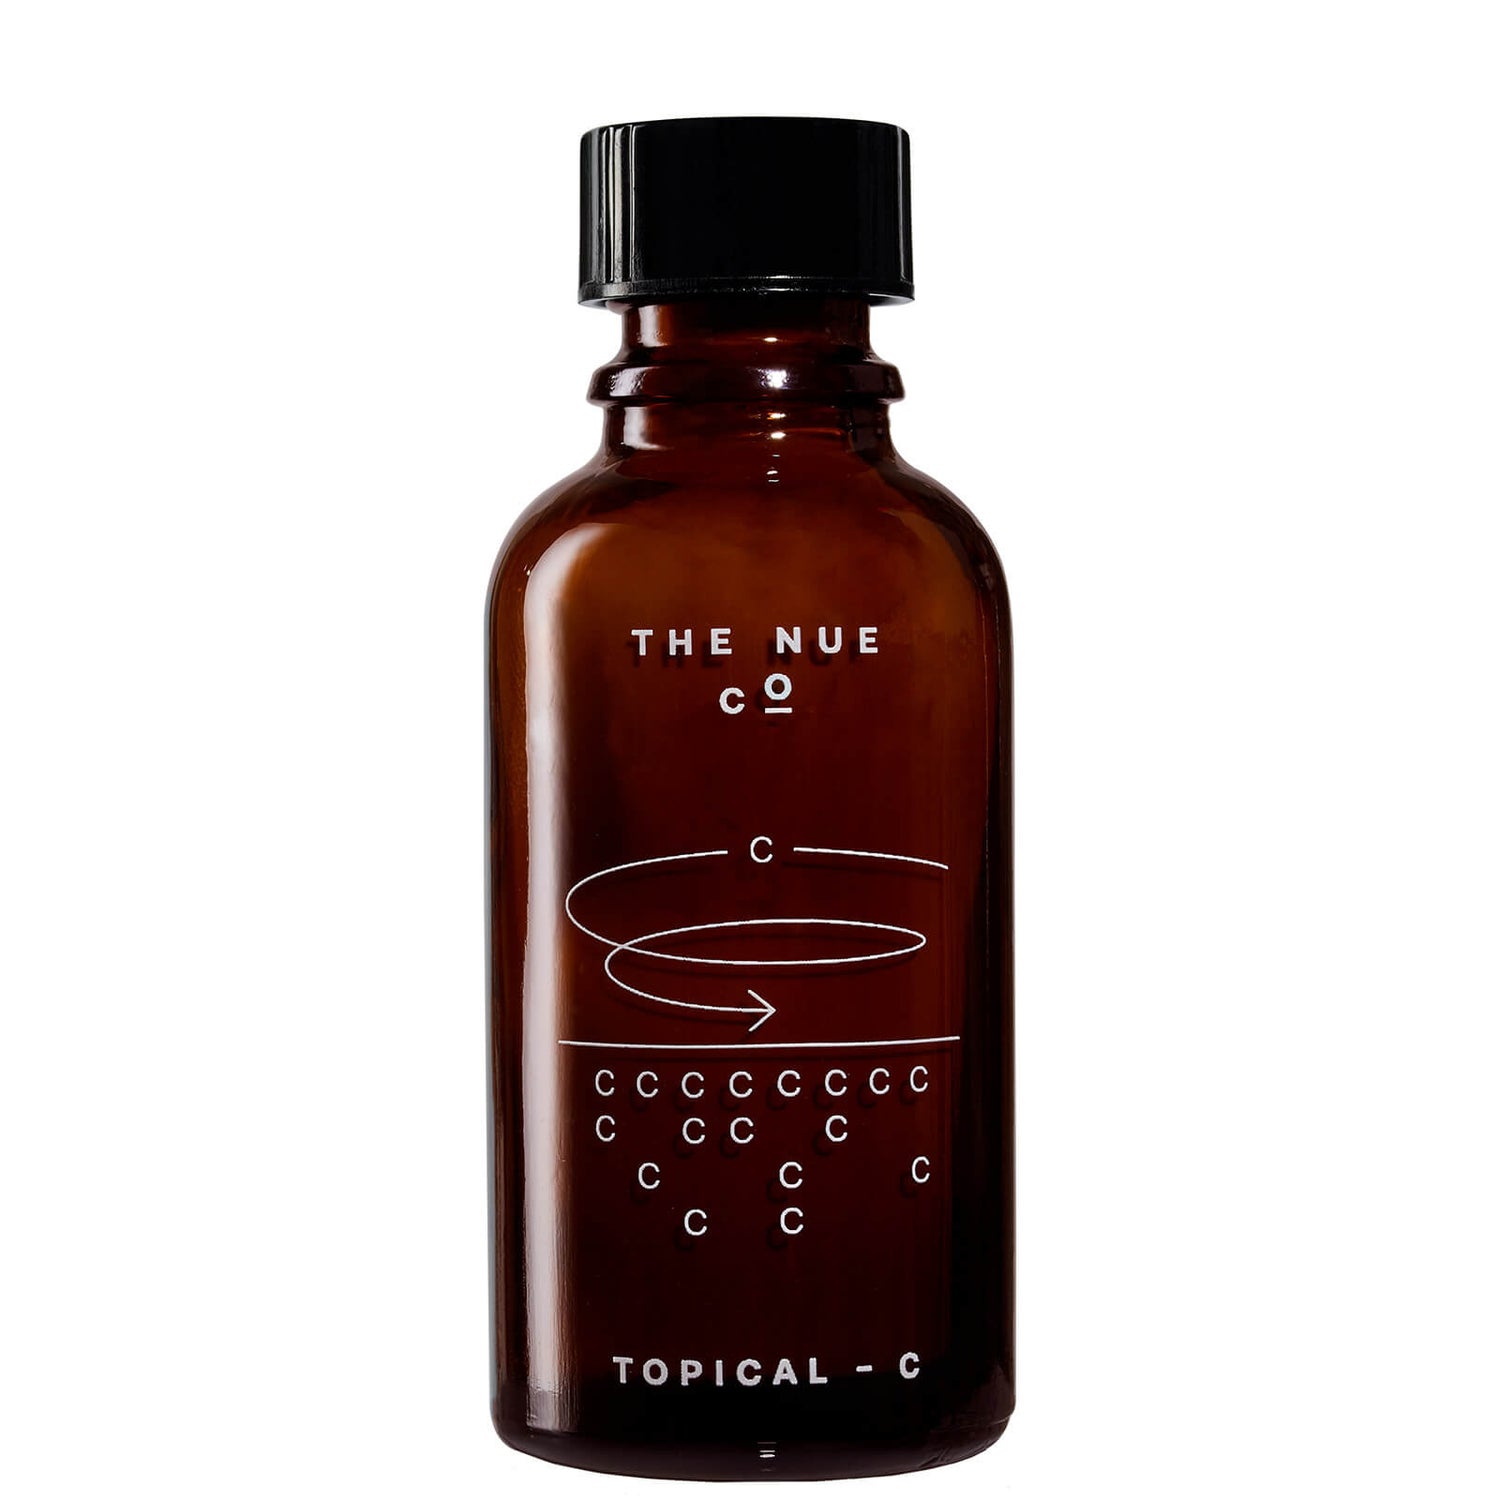 The Nue Co. Topical - C 0.49 oz.